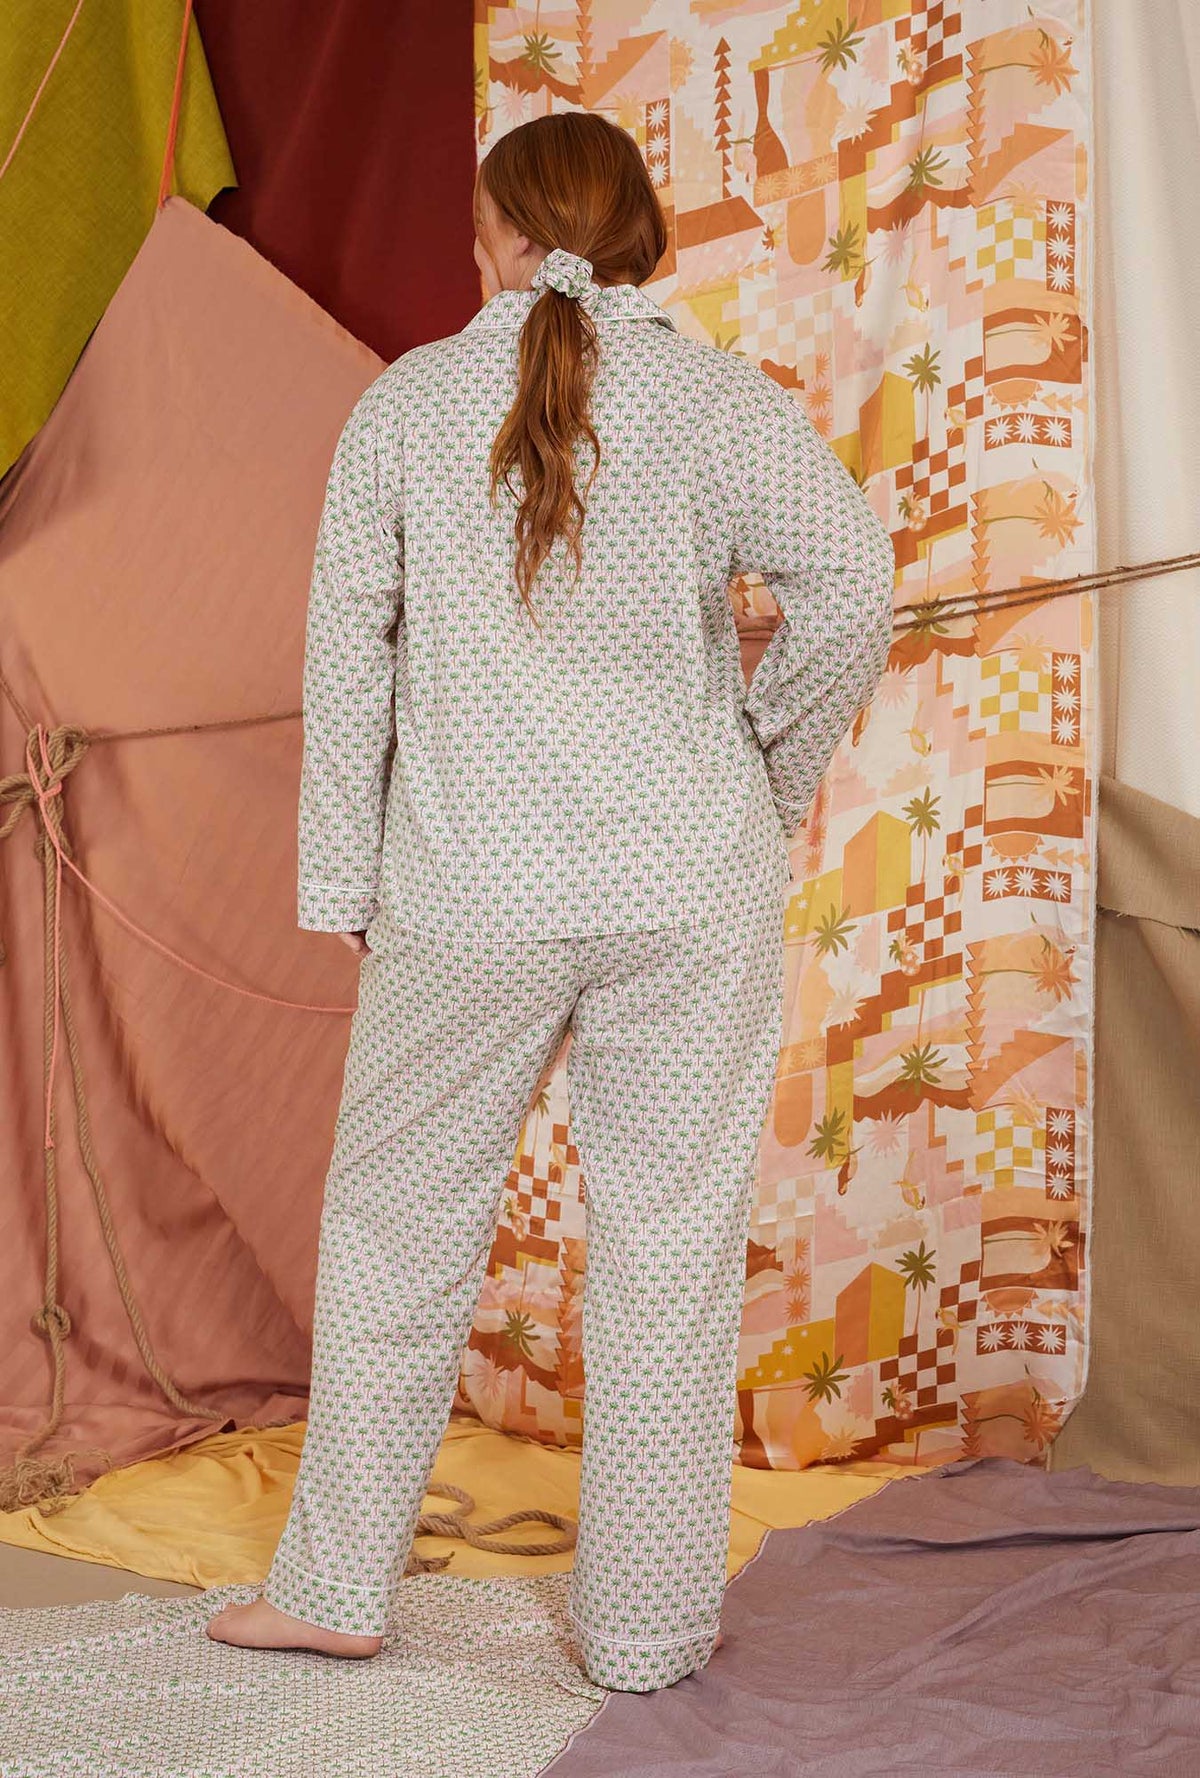 A lady wearing multicolor long sleeve clasic woven cotton poplin plus size pj set with palm geo print.